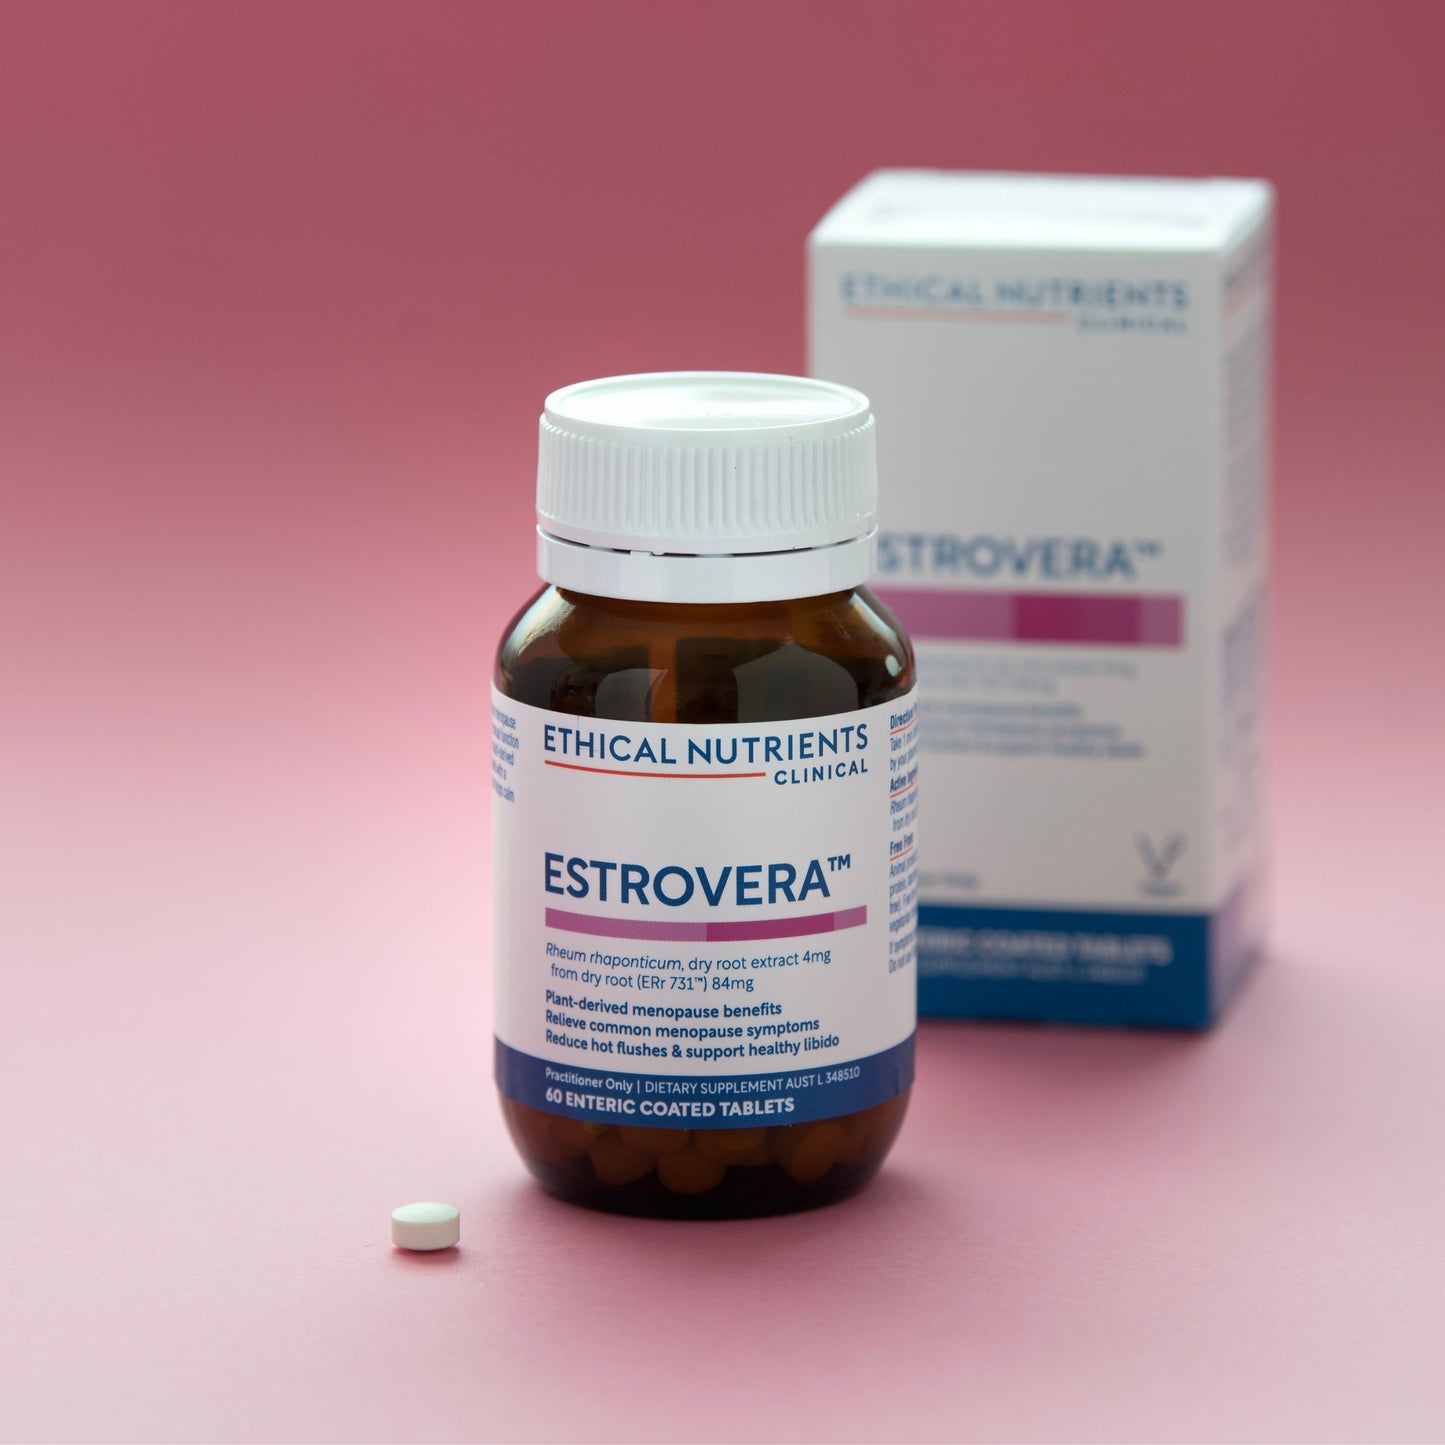 Ethical Nutrients Clinical Estrovera Bottle, Box & Tablet